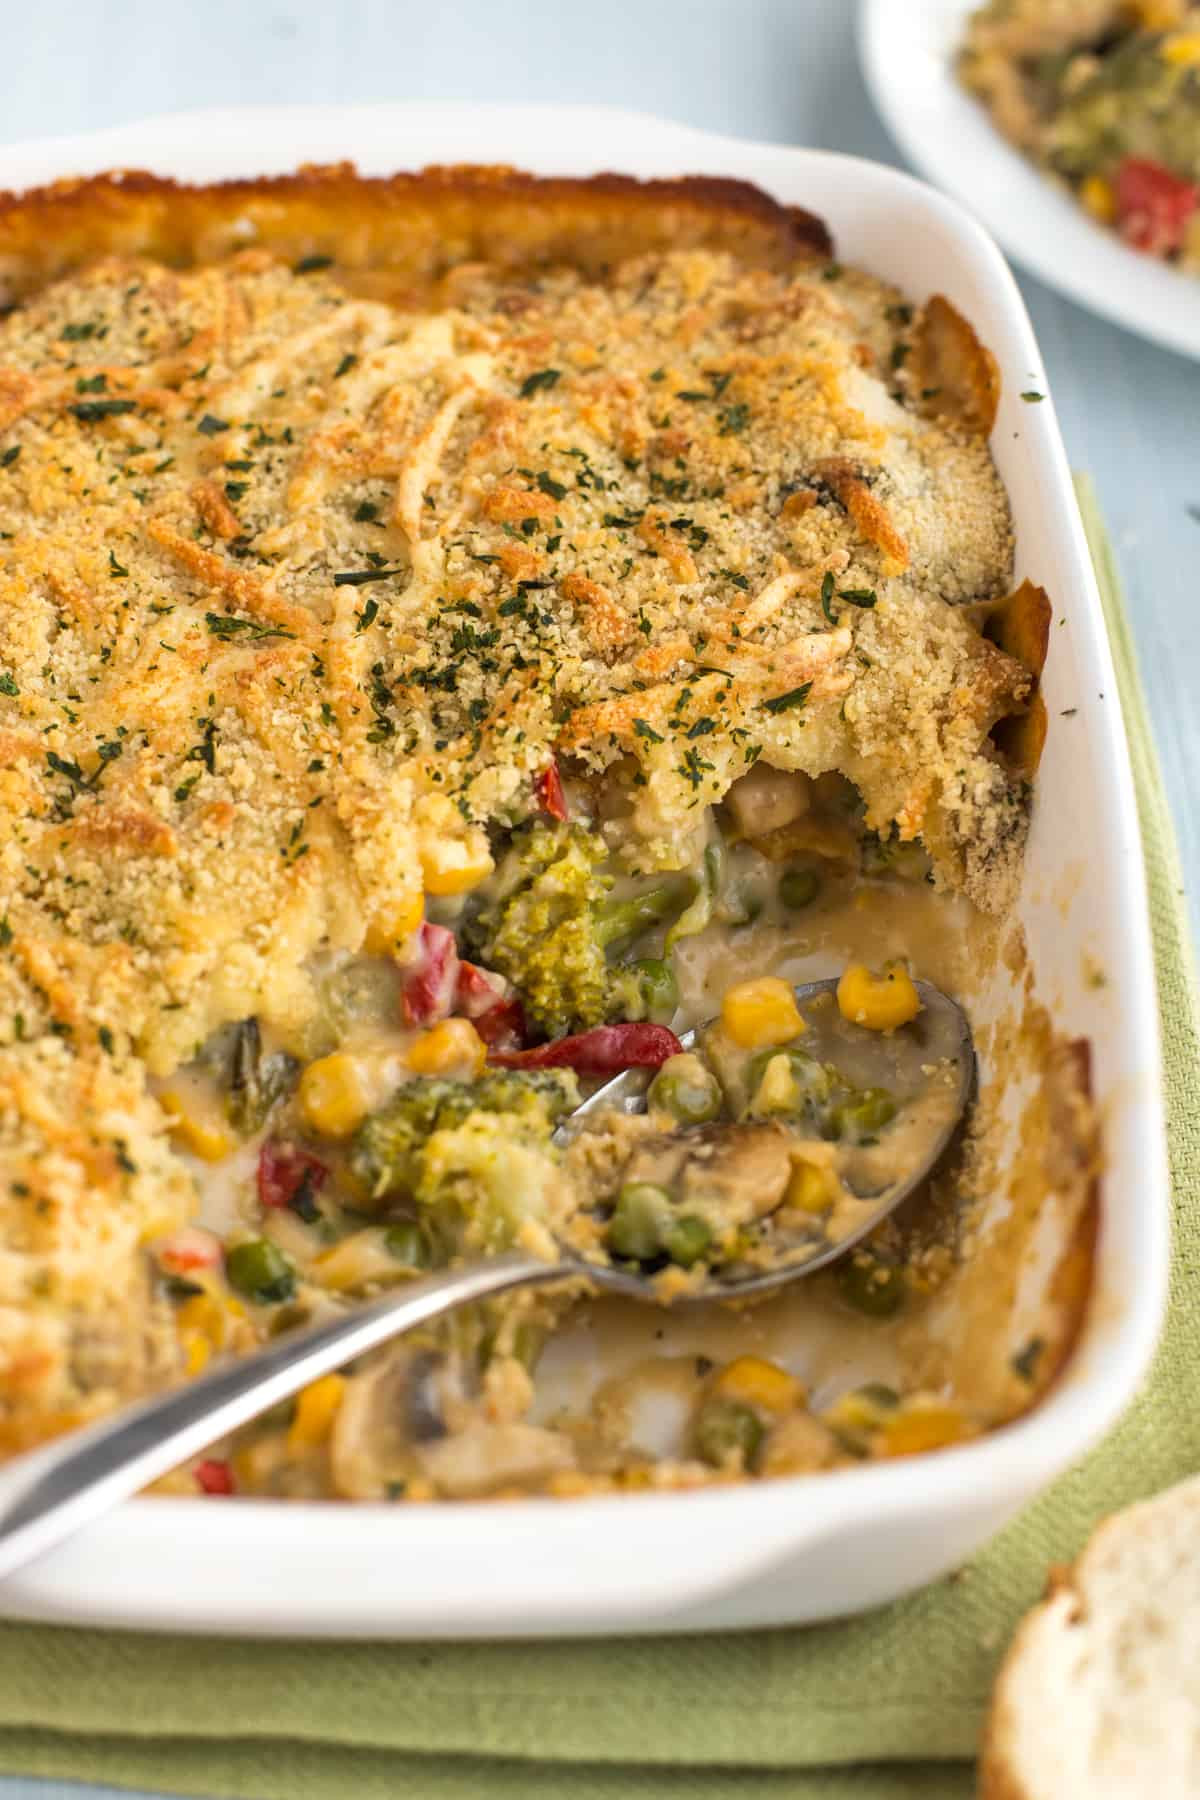 15 Ideas for Baked Vegetable Casserole